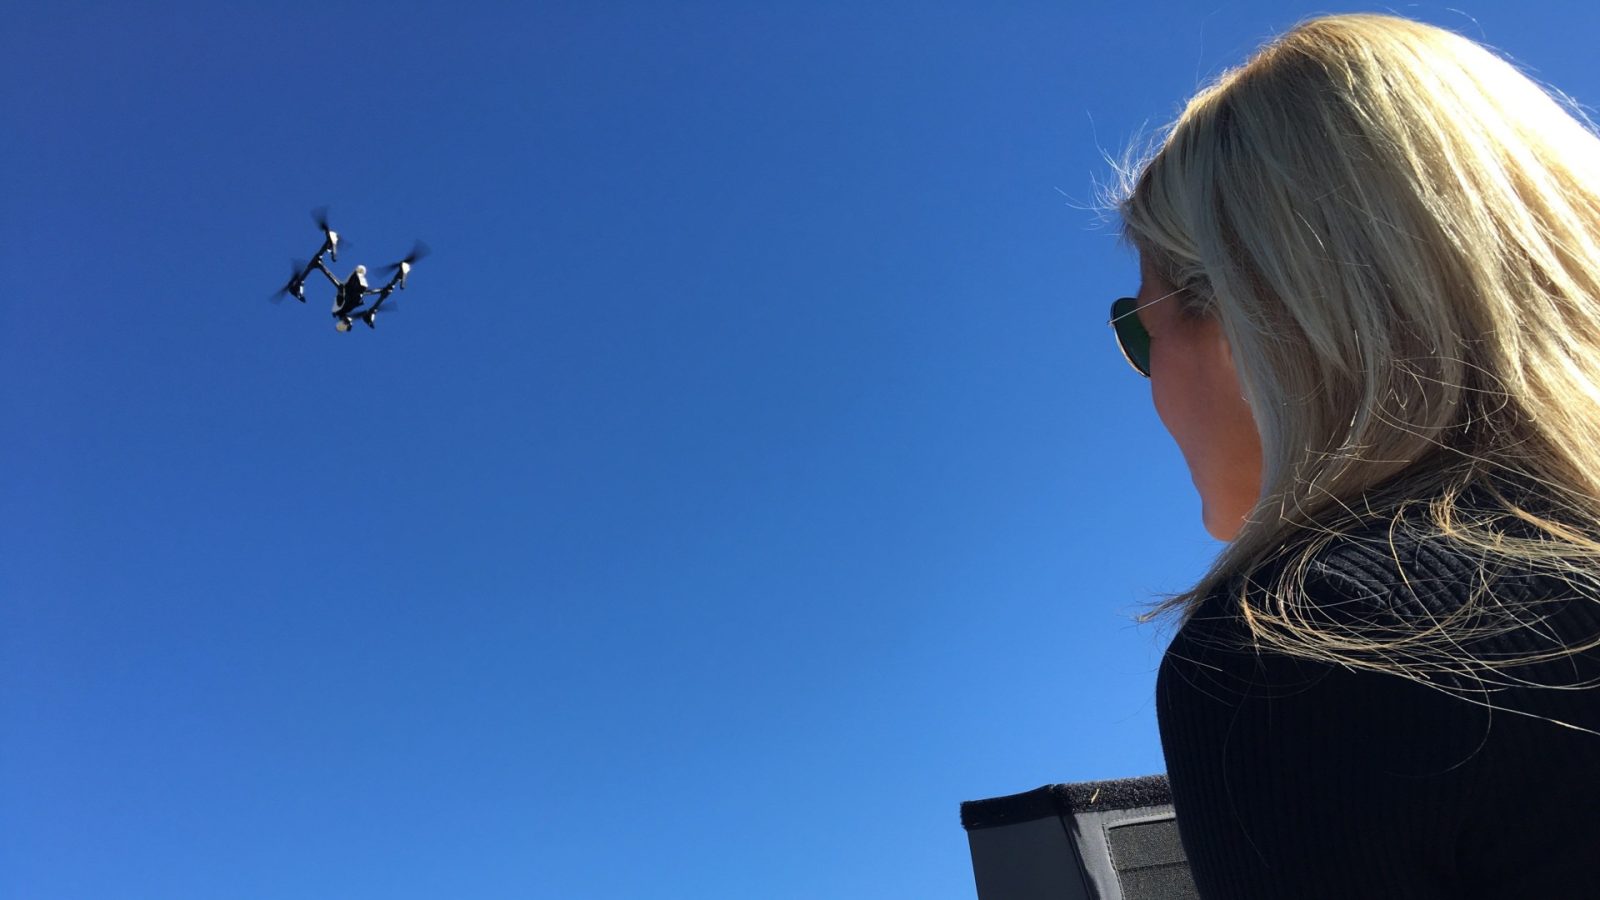 Hobby drone pilots not allowed to fly in controlled airspace by FAA